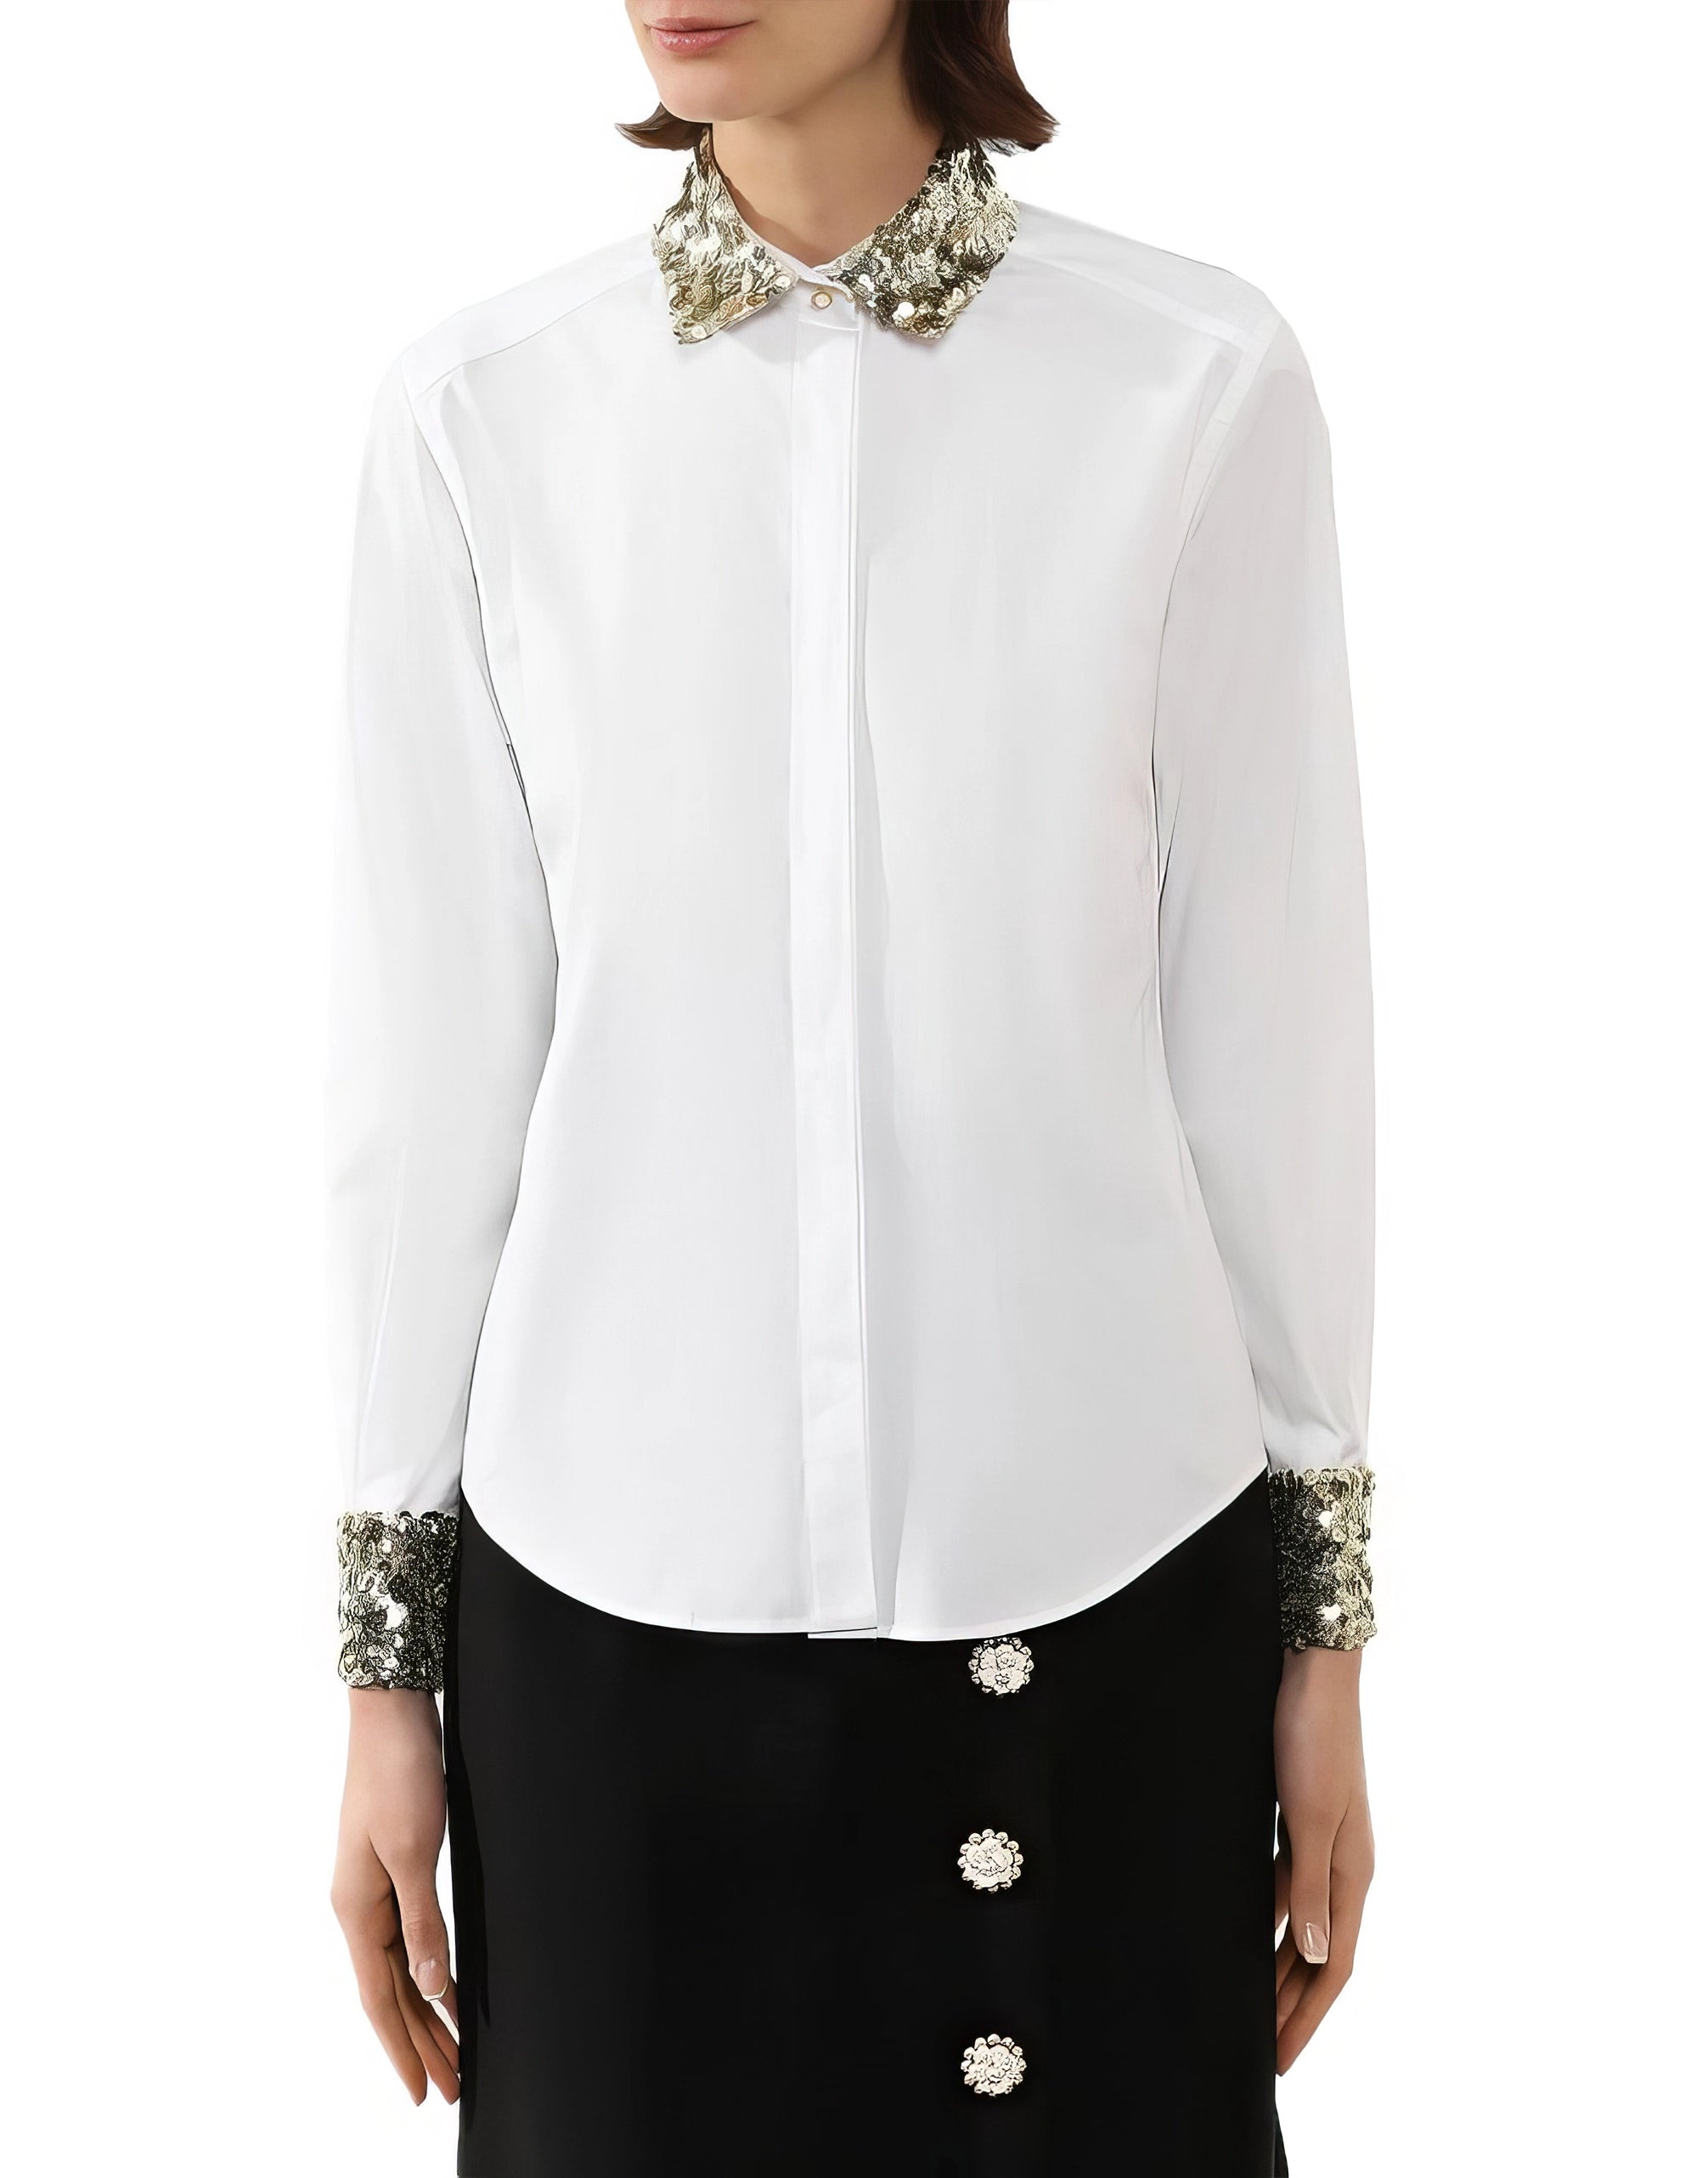 Shirt With Sequined Collar And Cuffs